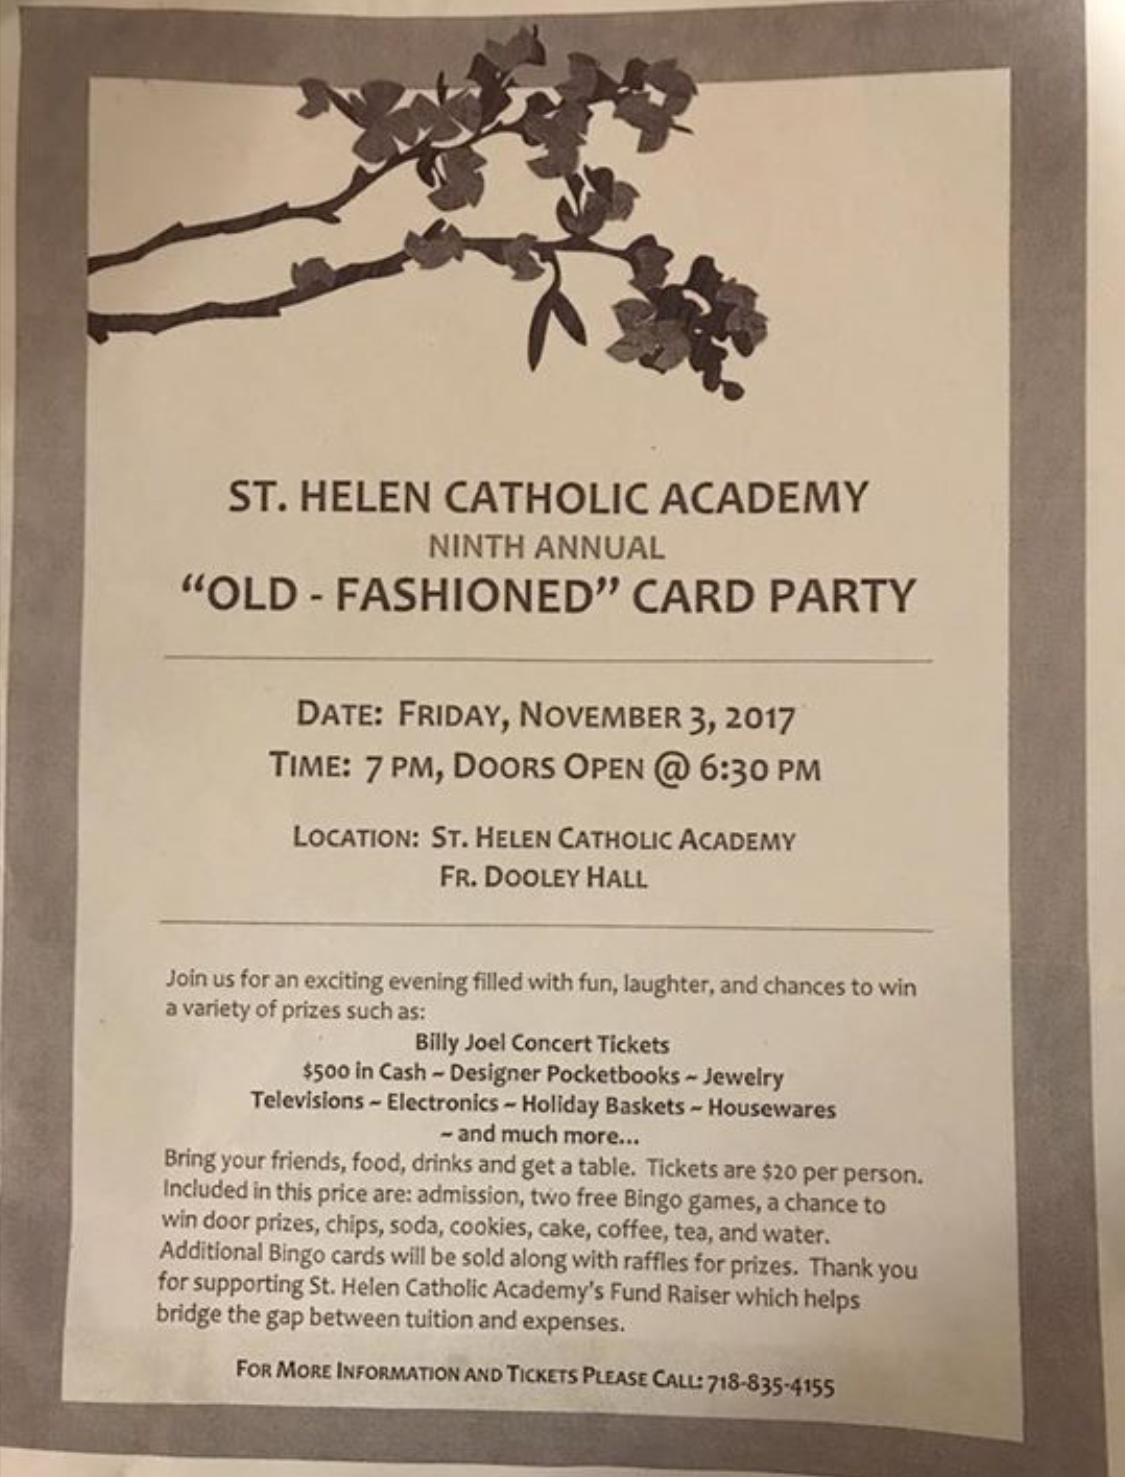 St. Helen Catholic Academy "Old Fashioned" Card Party